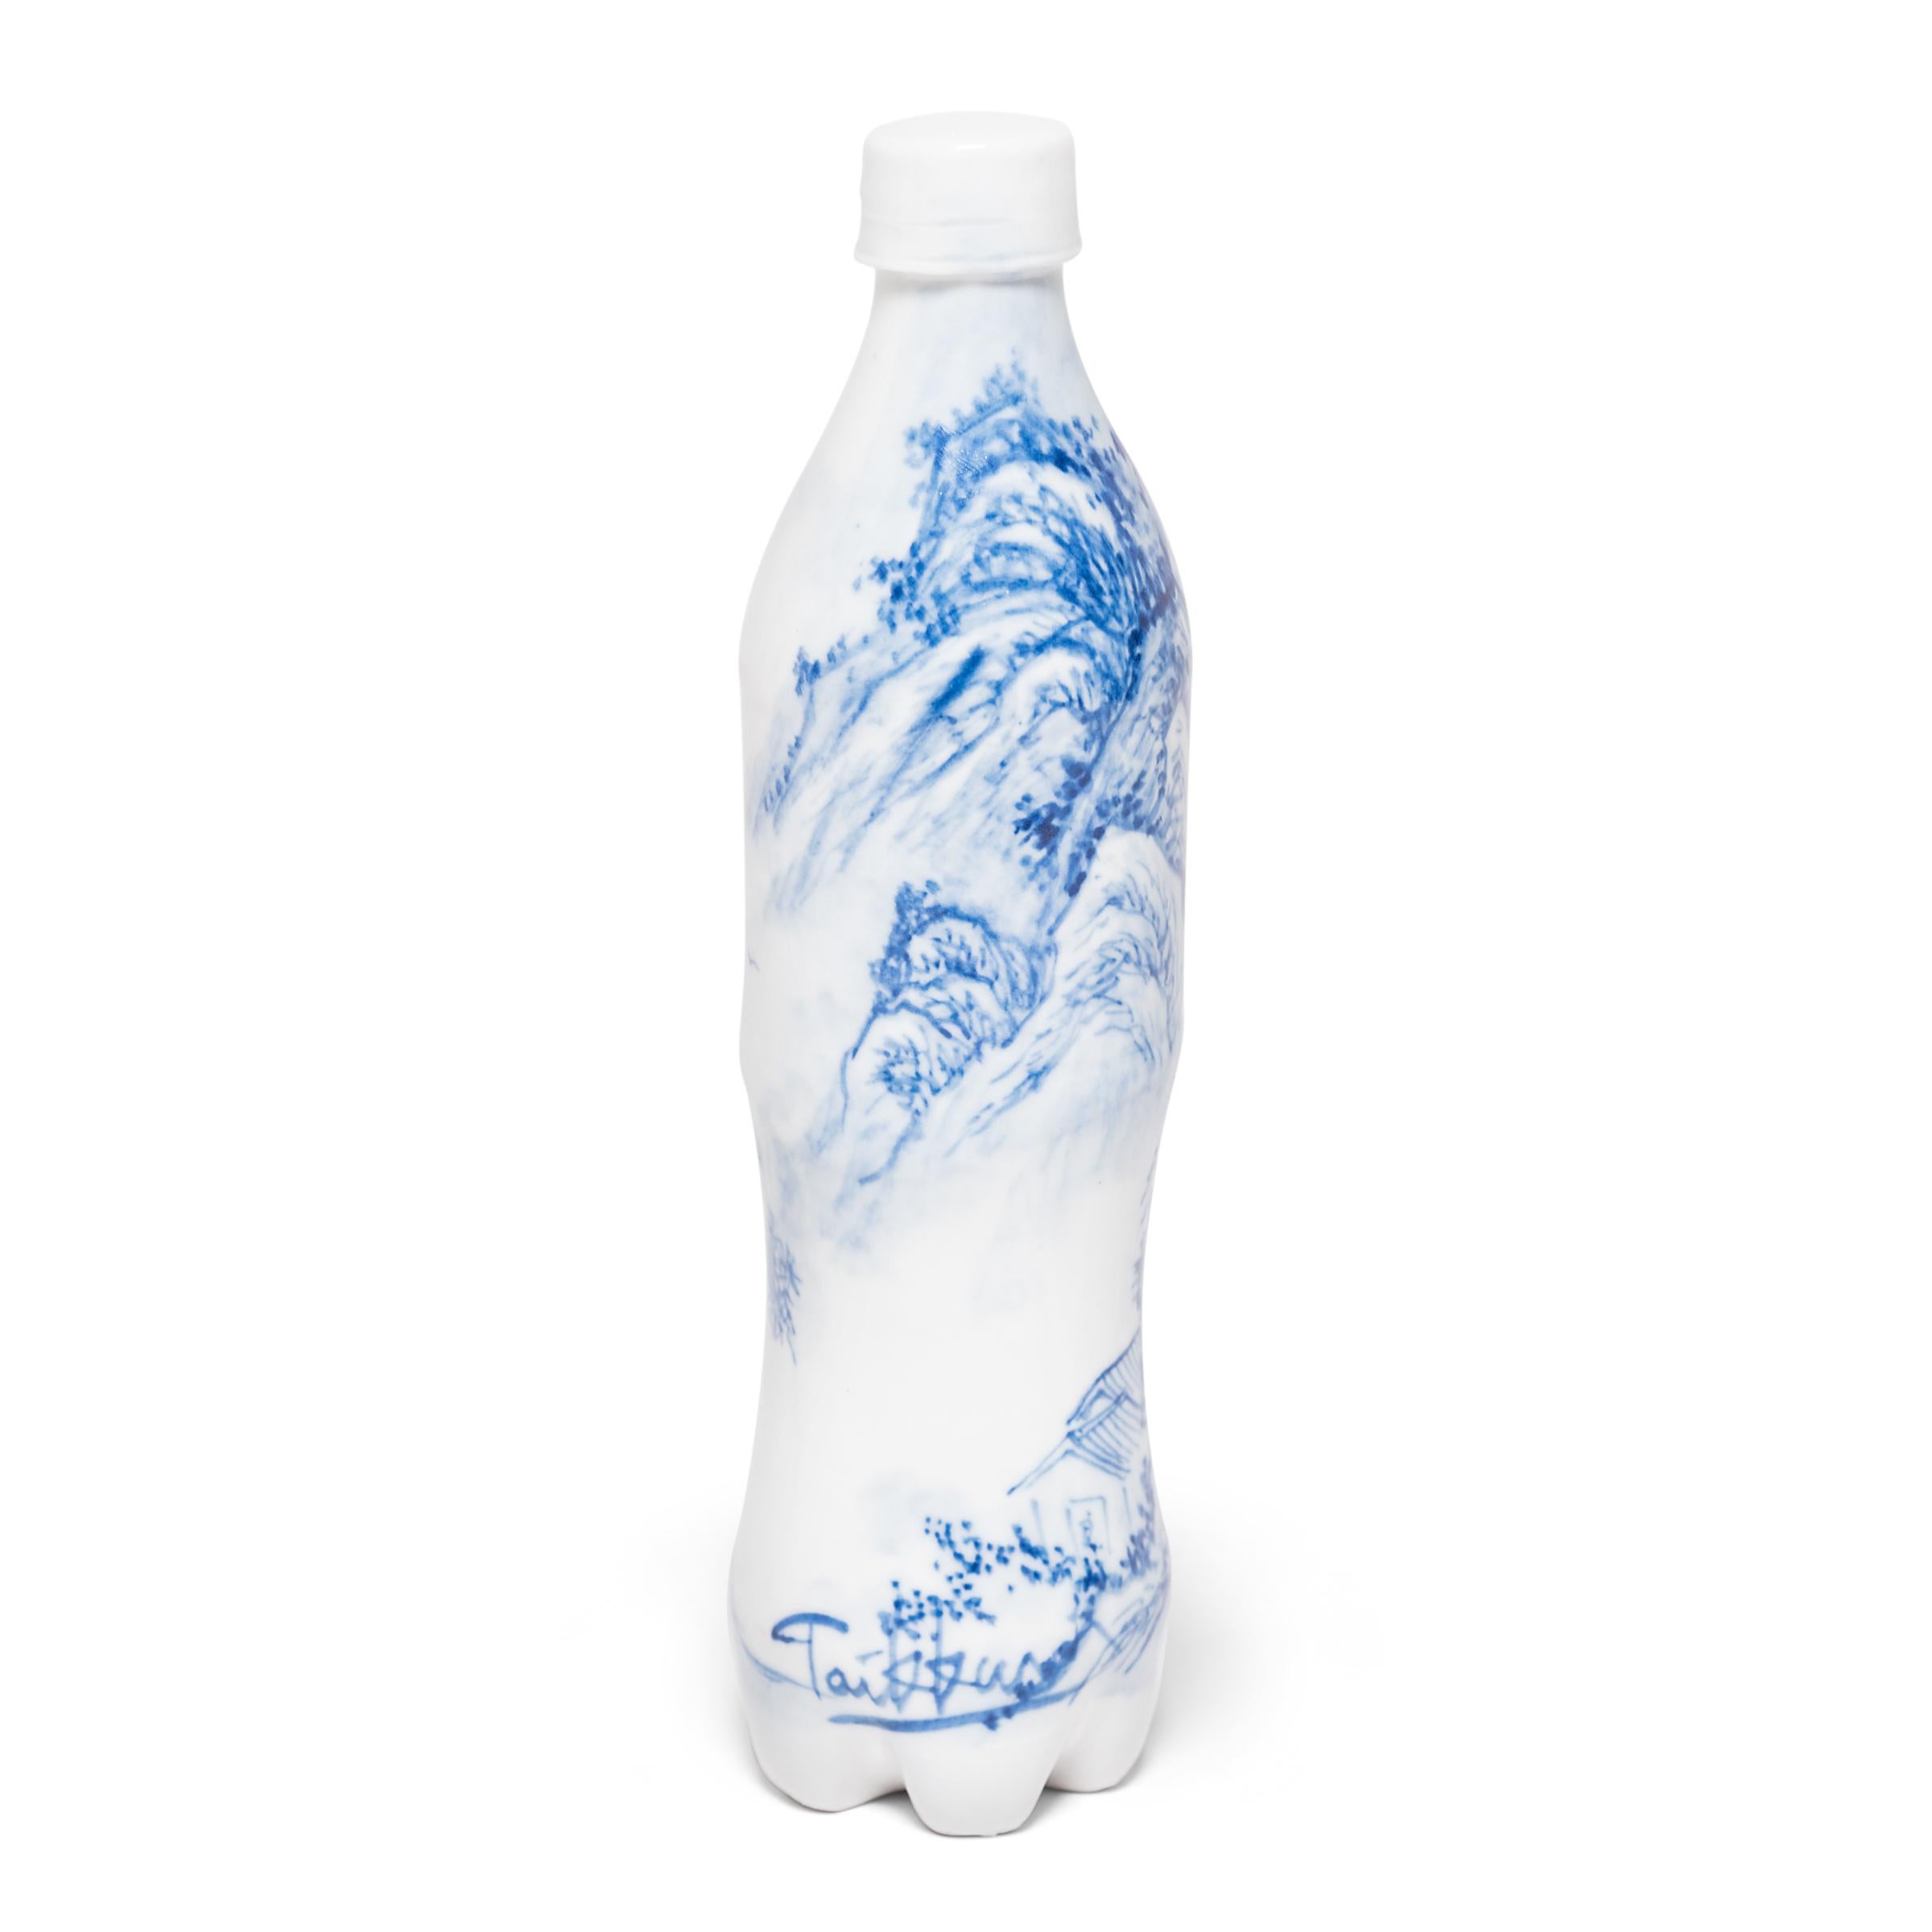 Created by artist Taikkun Li exclusively for Pagoda Red, this limited edition hand painted cola bottle is one of a series drawing on the rich tradition of Chinese blue and white ceramics. Fired at the historic Chinese imperial kilns of Jingdezhen,